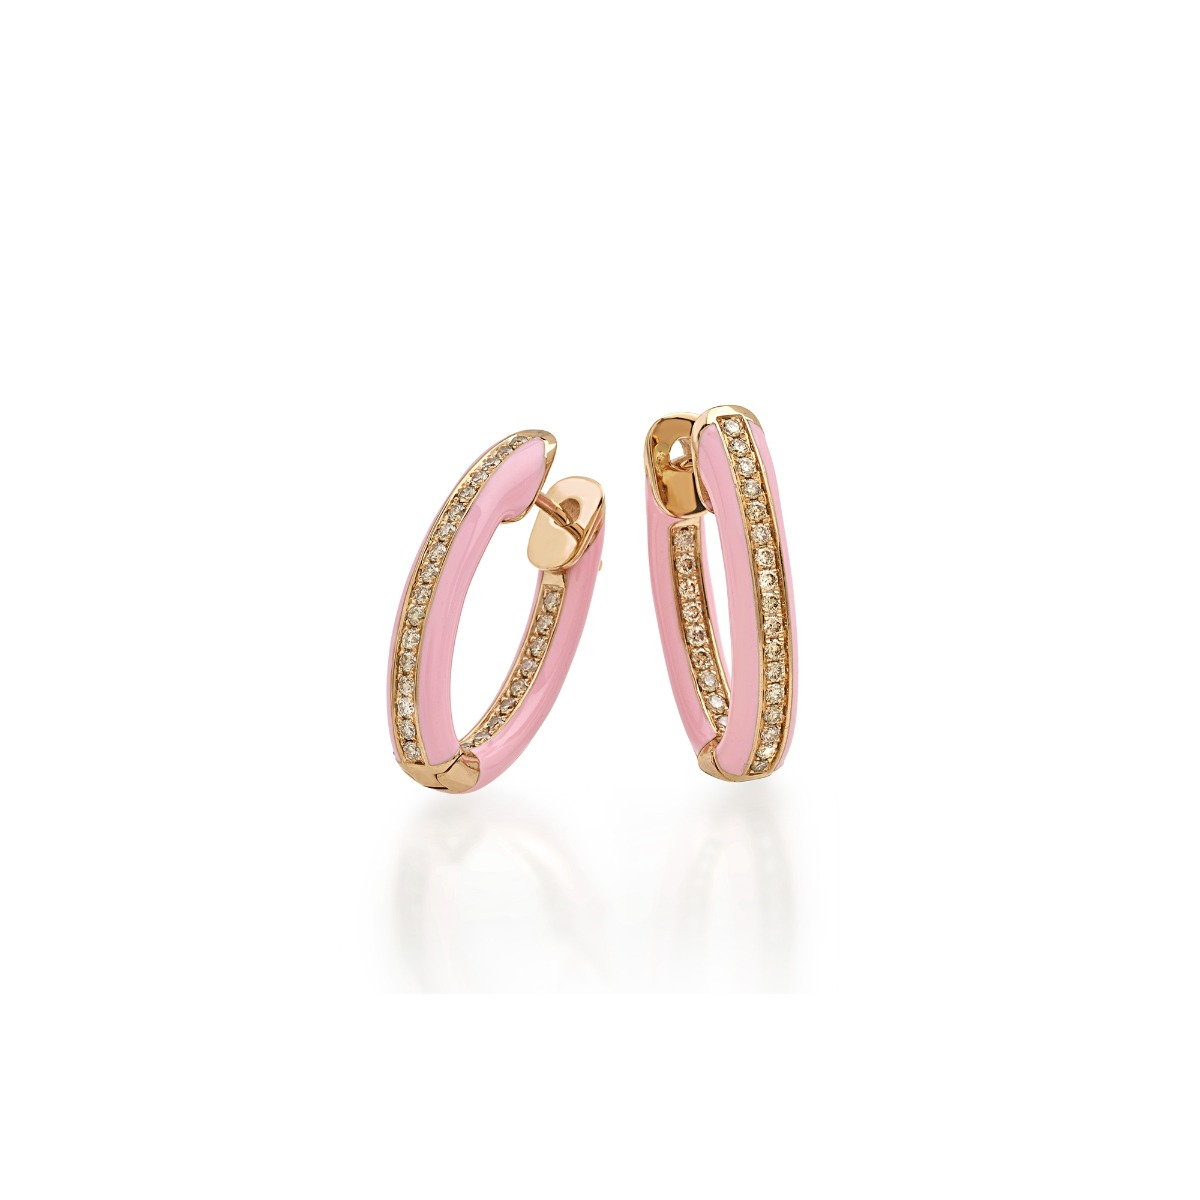 Earrings From The 'Infinito' Collection In 18 Kt Gold With Brown Diamonds And Enamel